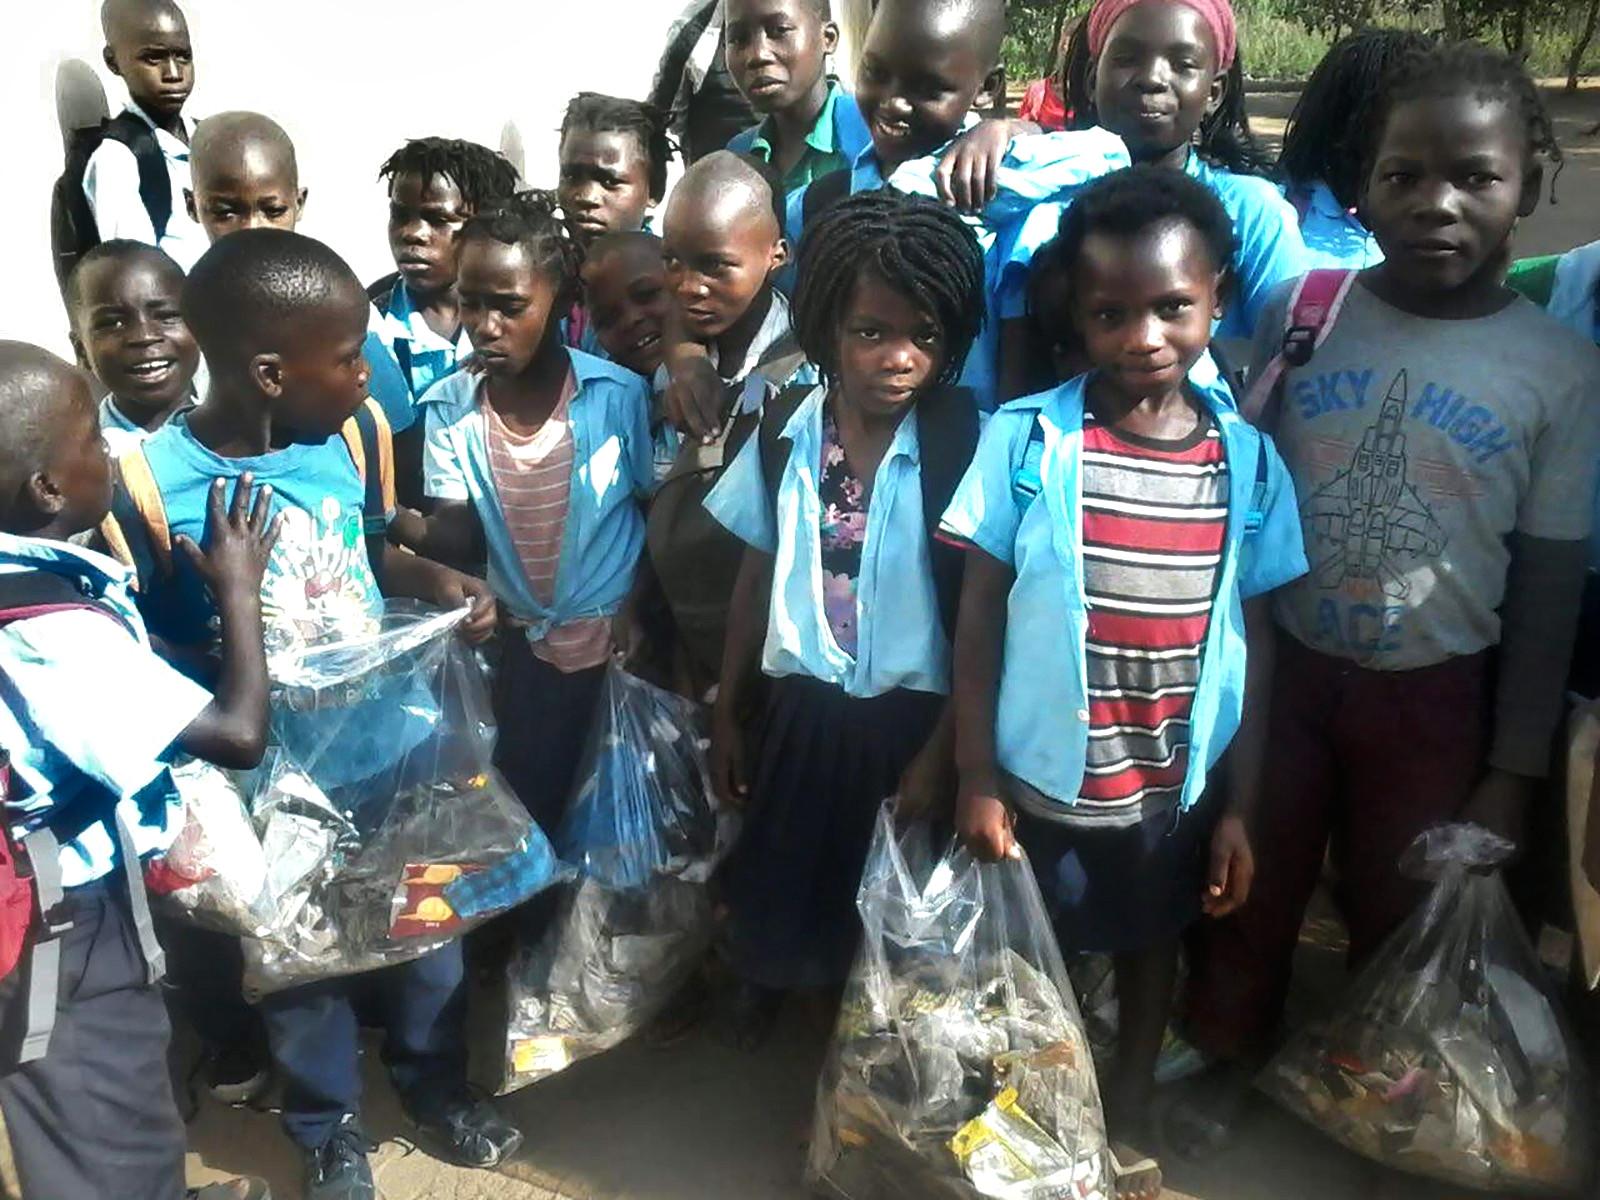 Children dressed in blue open shirts looking into the camera, holding trash bags